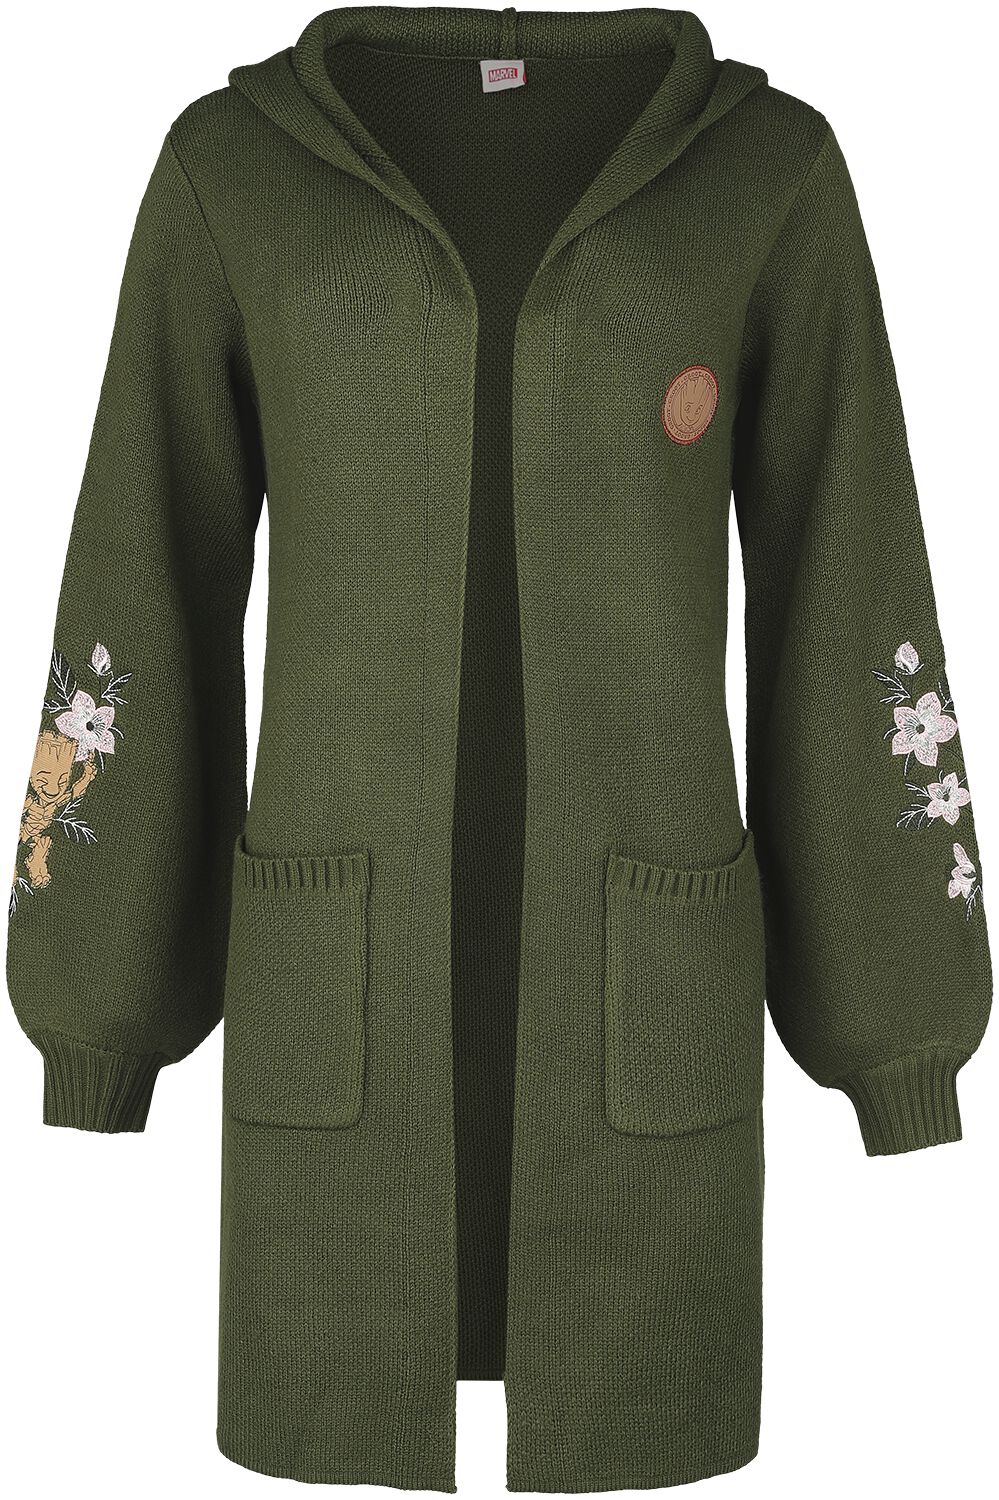 Guardians Of The Galaxy Floral Groot Cardigan dunkelgrün in S